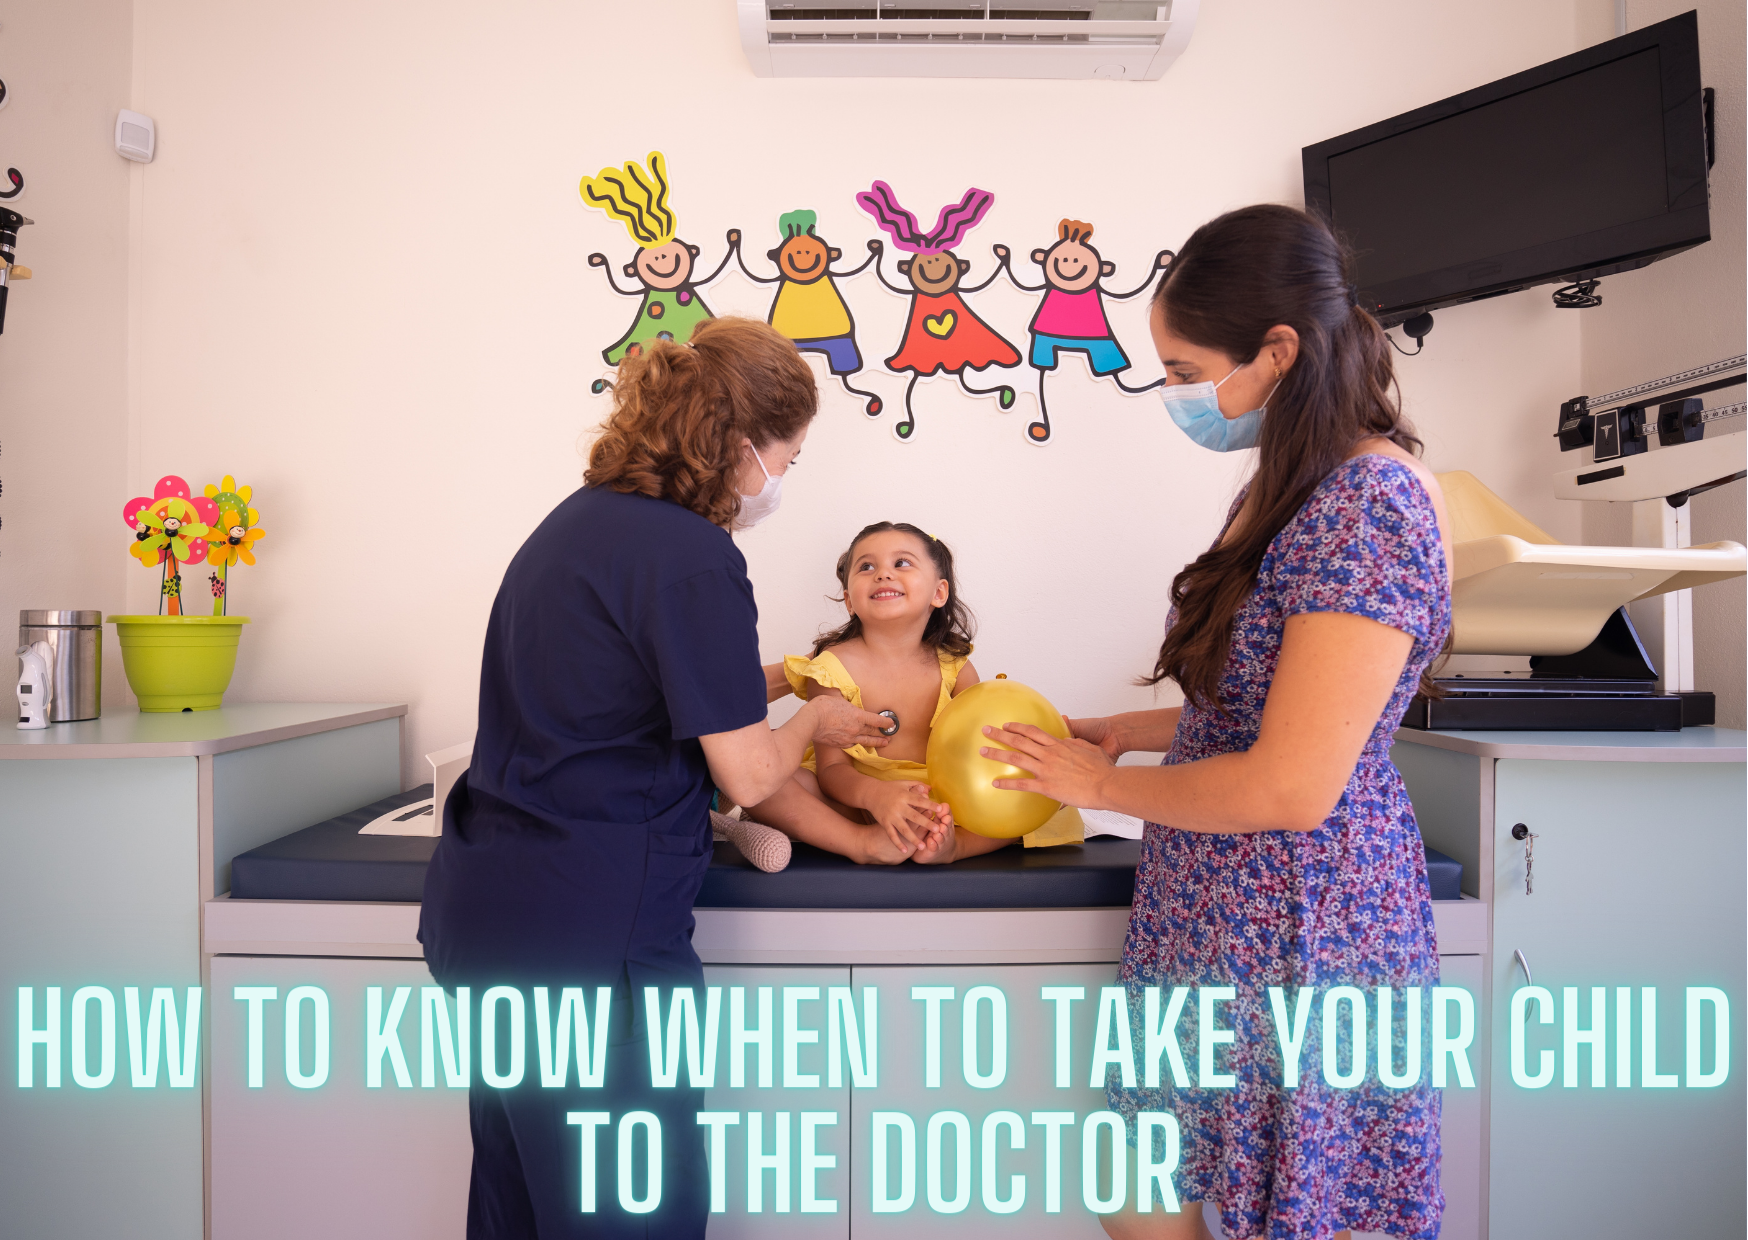 How to Know When to Take Your Child to the Doctor